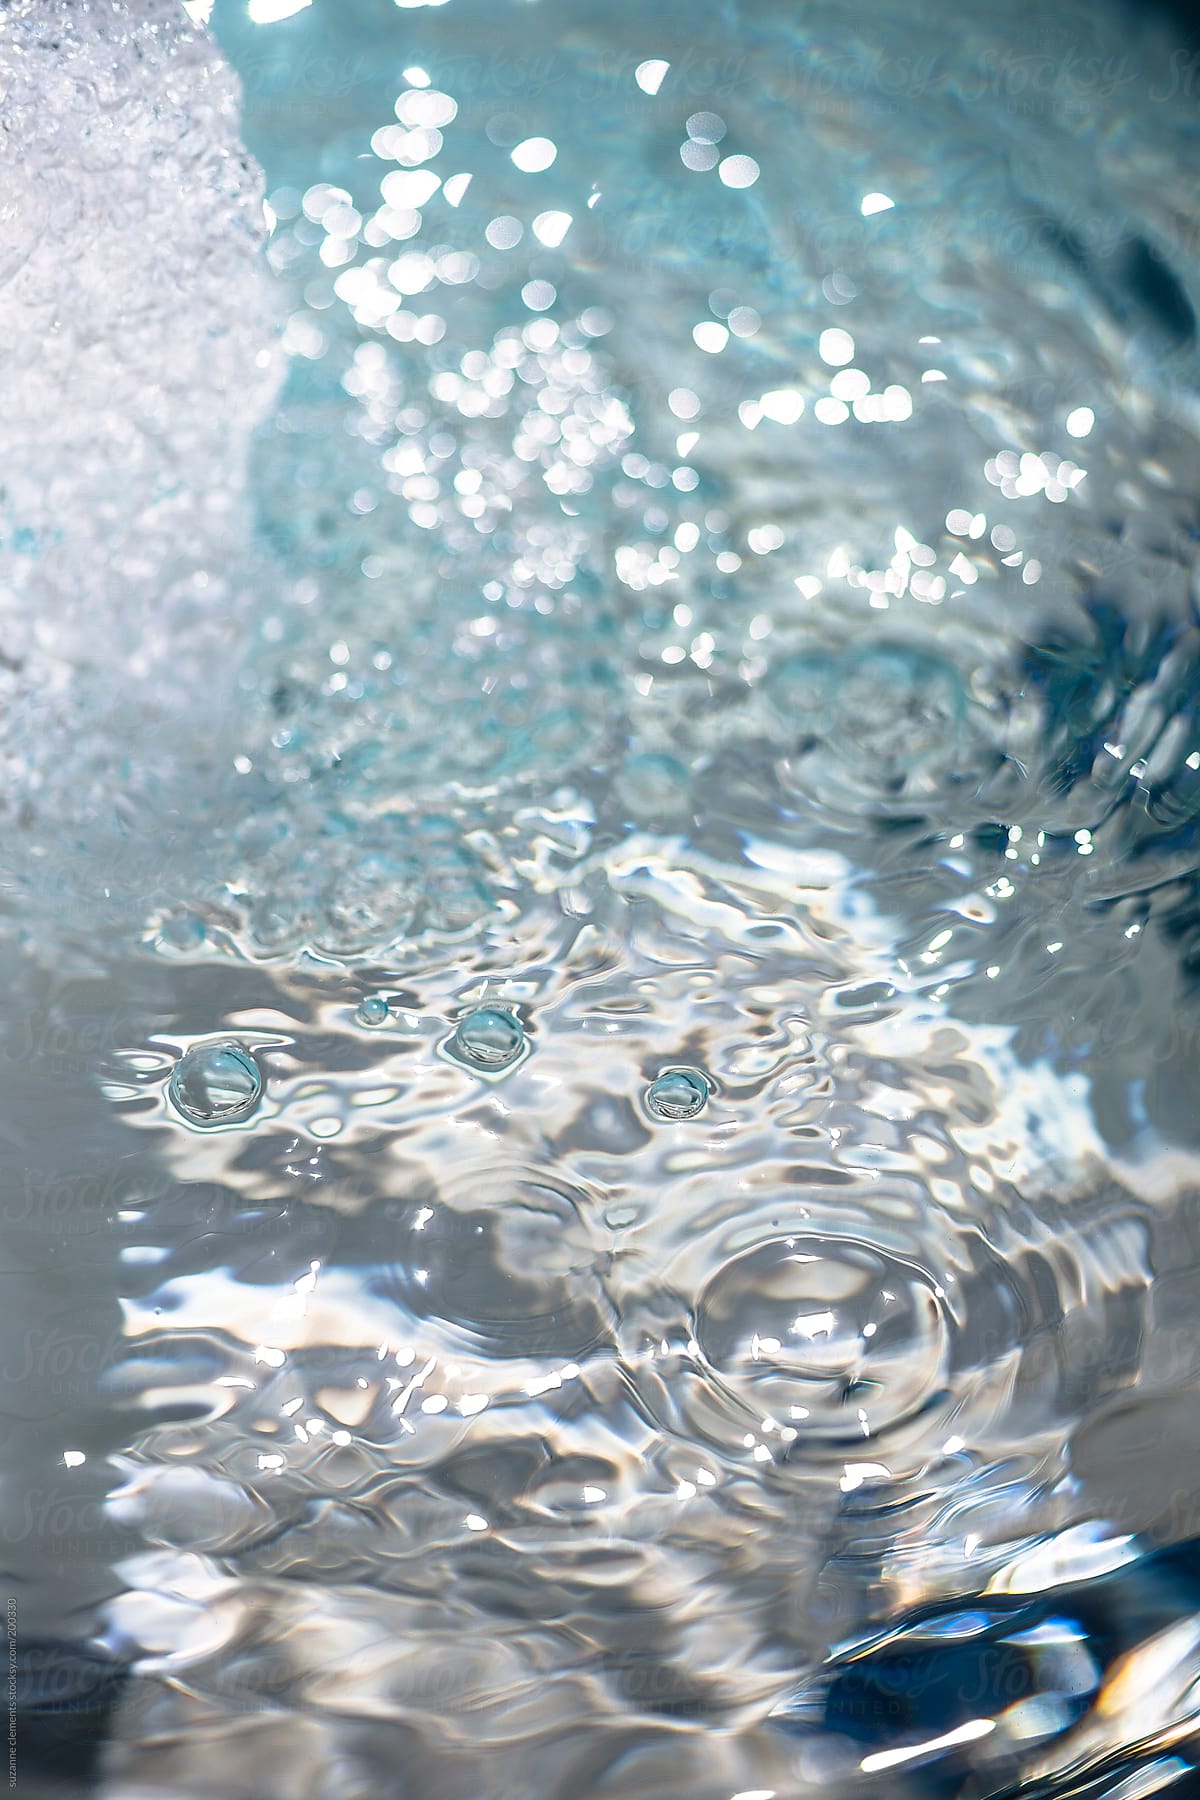 Glassy Ripples and Bubbles on the Surface of the Water